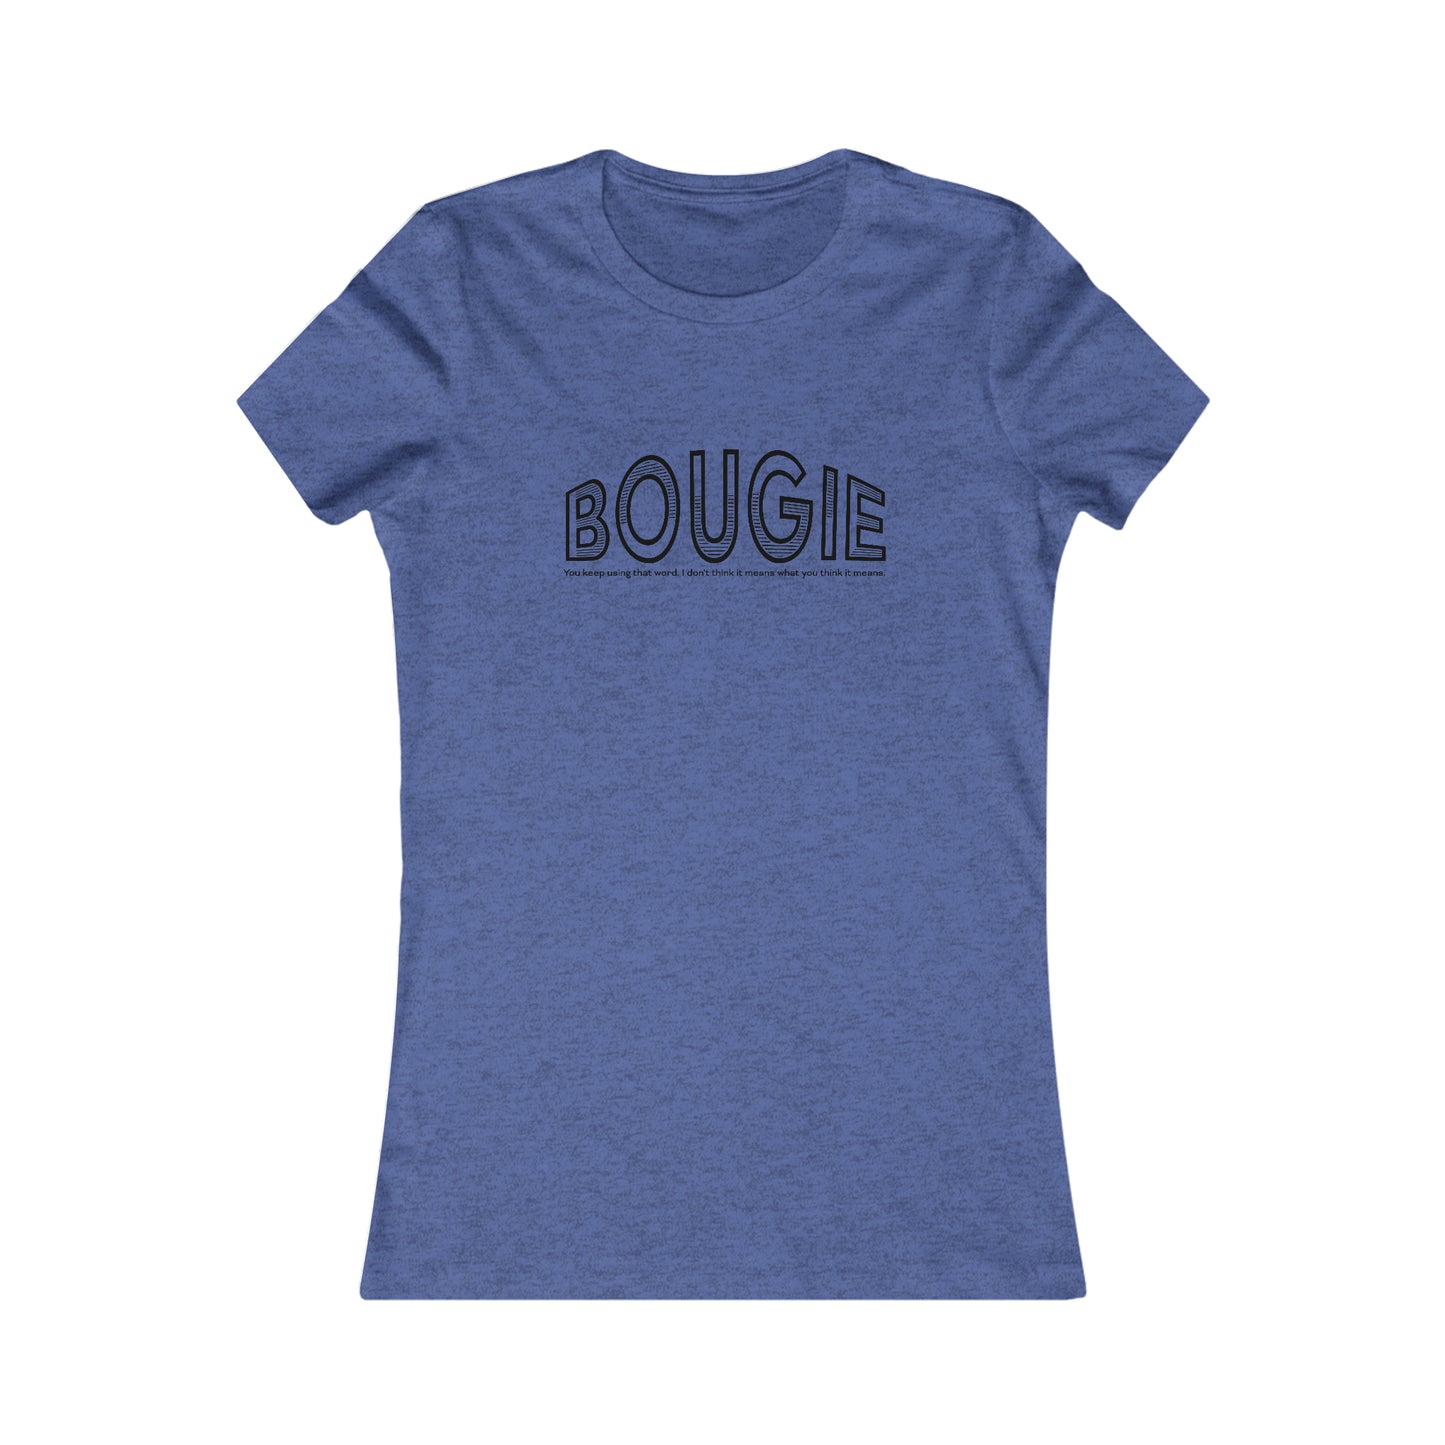 Bougie T-Shirt For Bourgeois TShirt For French Word T Shirt For Fake Rich Shirt For Middle Class TShirt For  Conservative T-Shirt For Materialistic Women